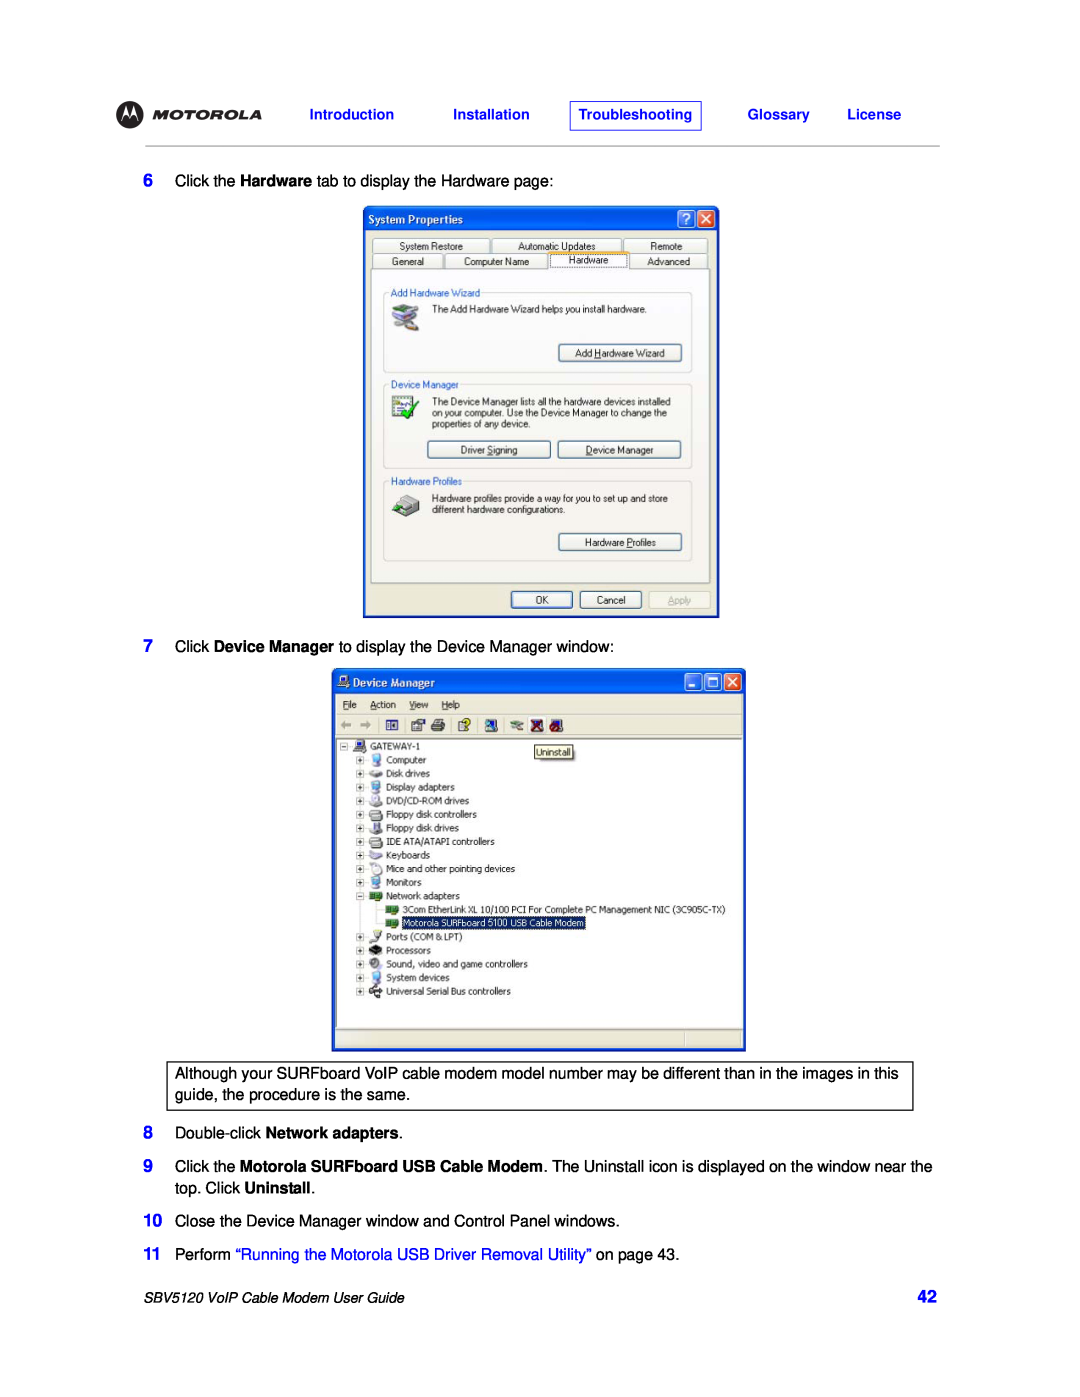 Motorola SBV5120 manual Double-click Network adapters, Perform “Running the Motorola USB Driver Removal Utility” on page 